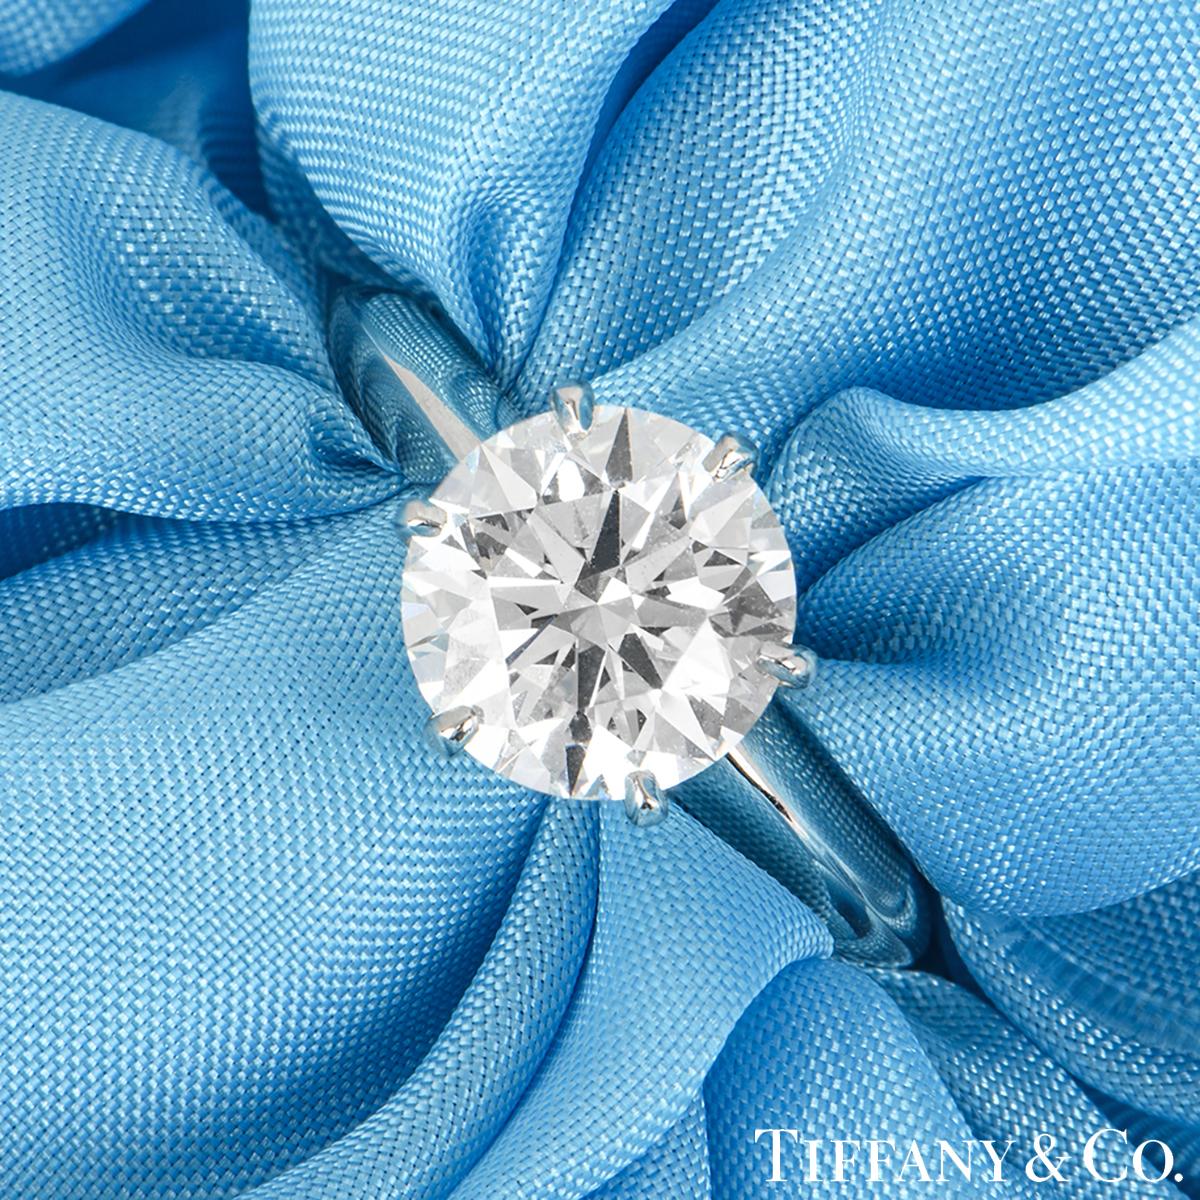 A beautiful platinum diamond ring by Tiffany & Co. from The Setting collection. The ring comprises of a round brilliant cut diamond in a 6 claw setting with a weight of 2.13ct, H colour and VVS1 clarity as clarified on the recent GIA diamond report.